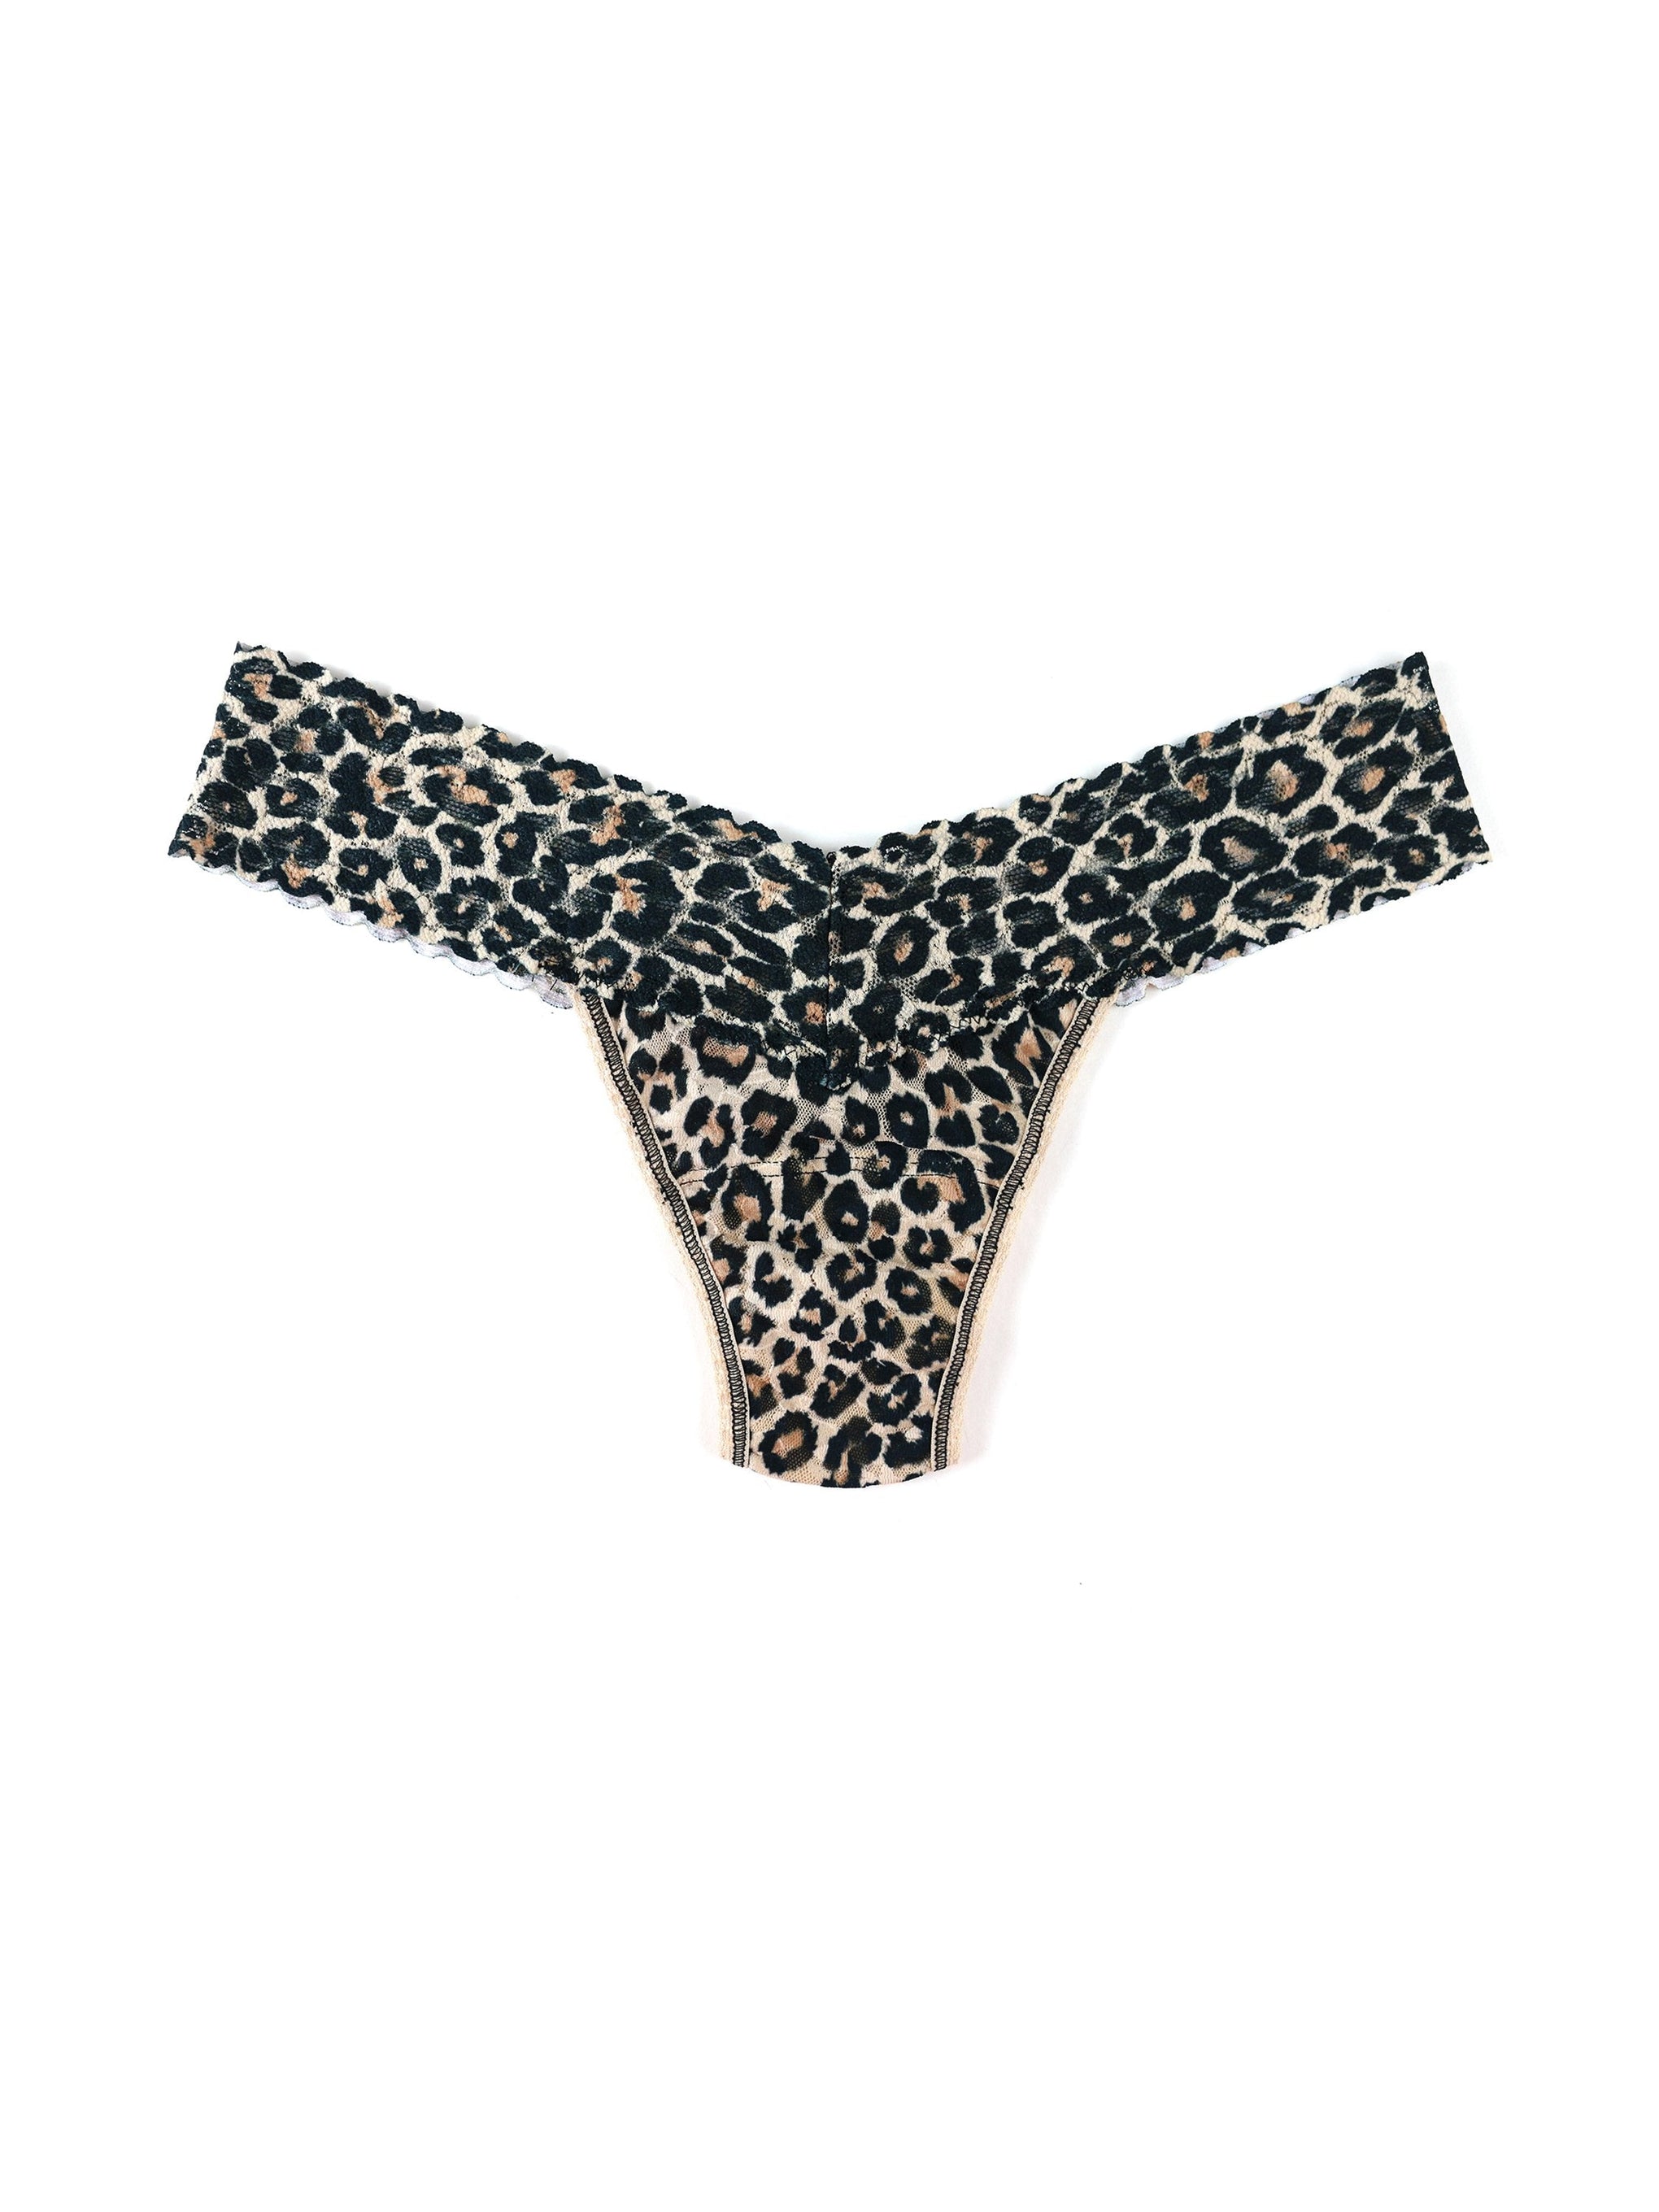 Printed Signature Lace Low Rise Thong-CLASSIC LEOPARD-Hanky Panky